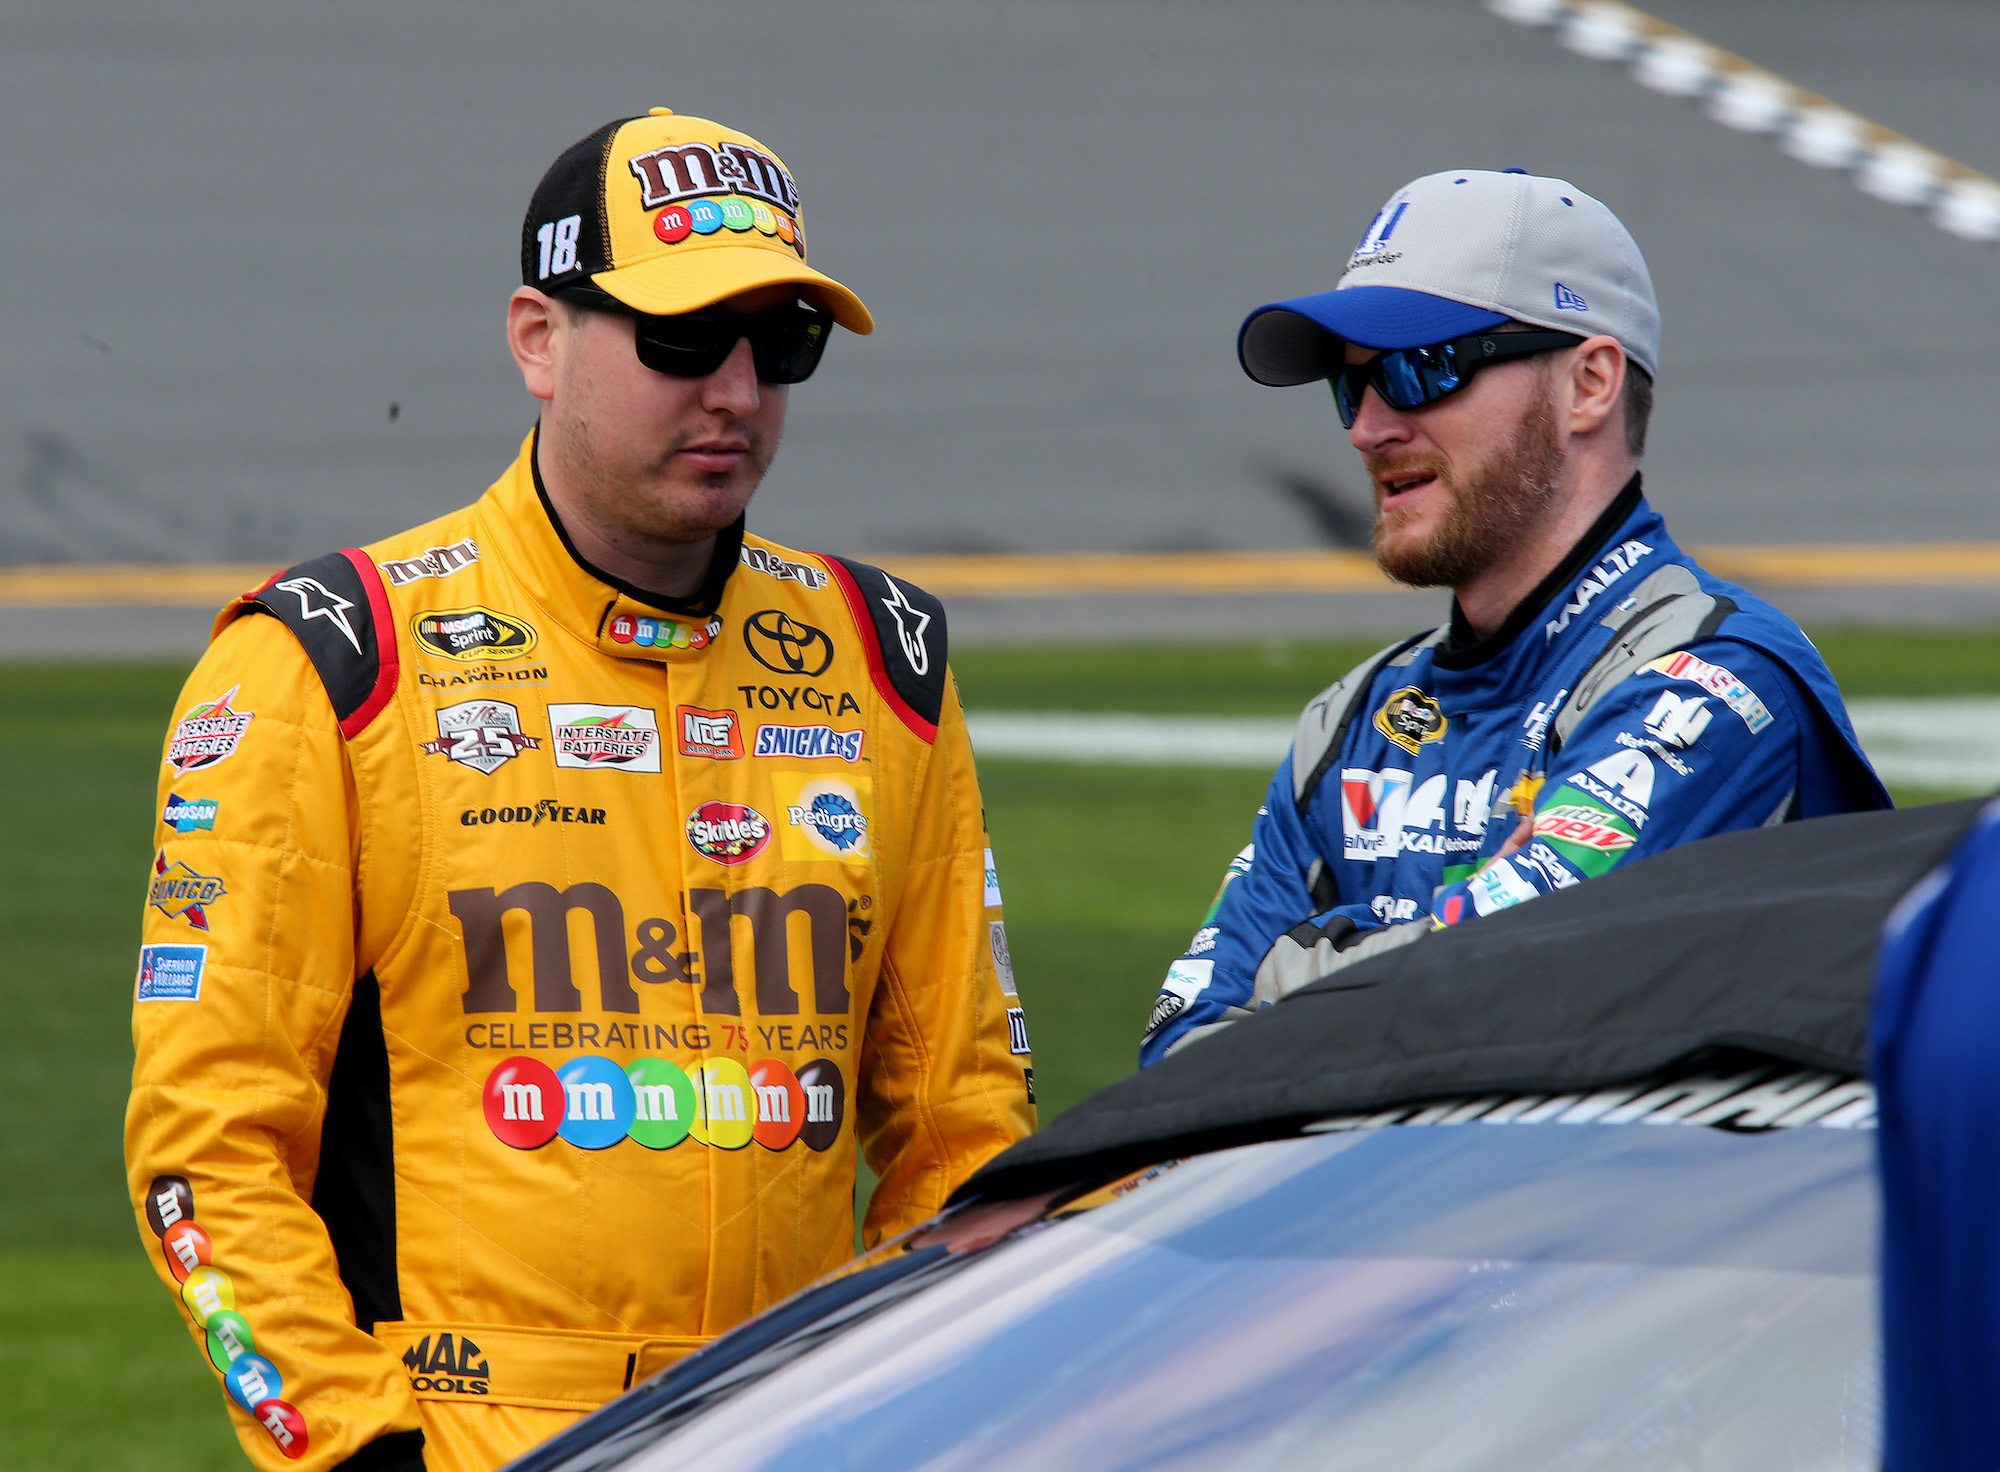 Dale Earnhardt Jr. and Kyle Busch on grid